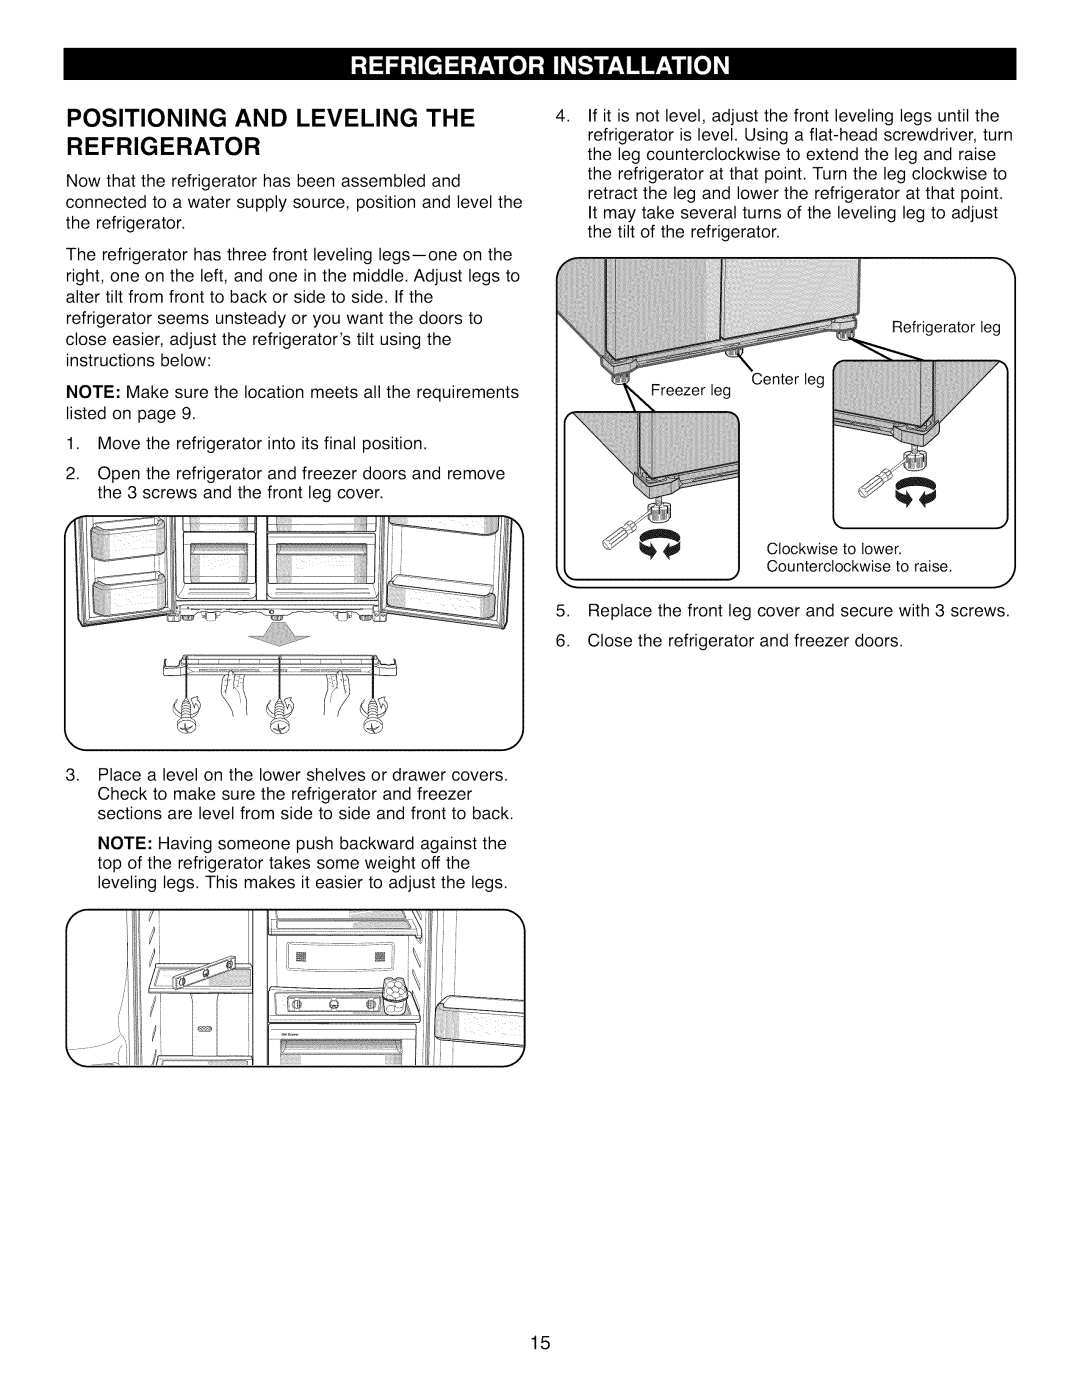 Kenmore 41003, 41002, 41009 manual Positioning And Leveling The Refrigerator, I Ji!i 